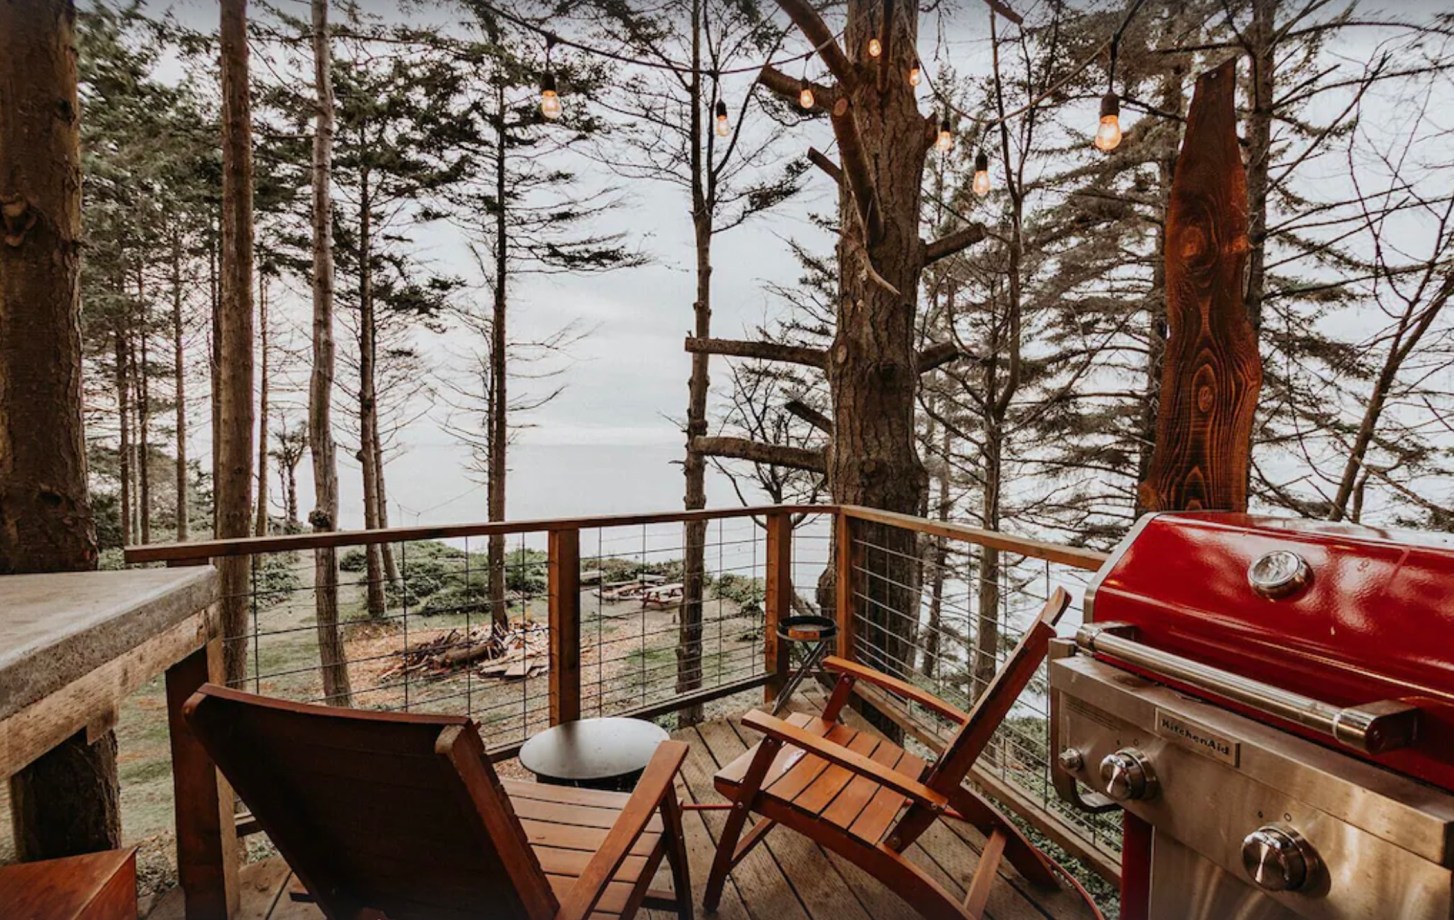 View from deck of Rustic Cedar Treehouse Rental in Washington